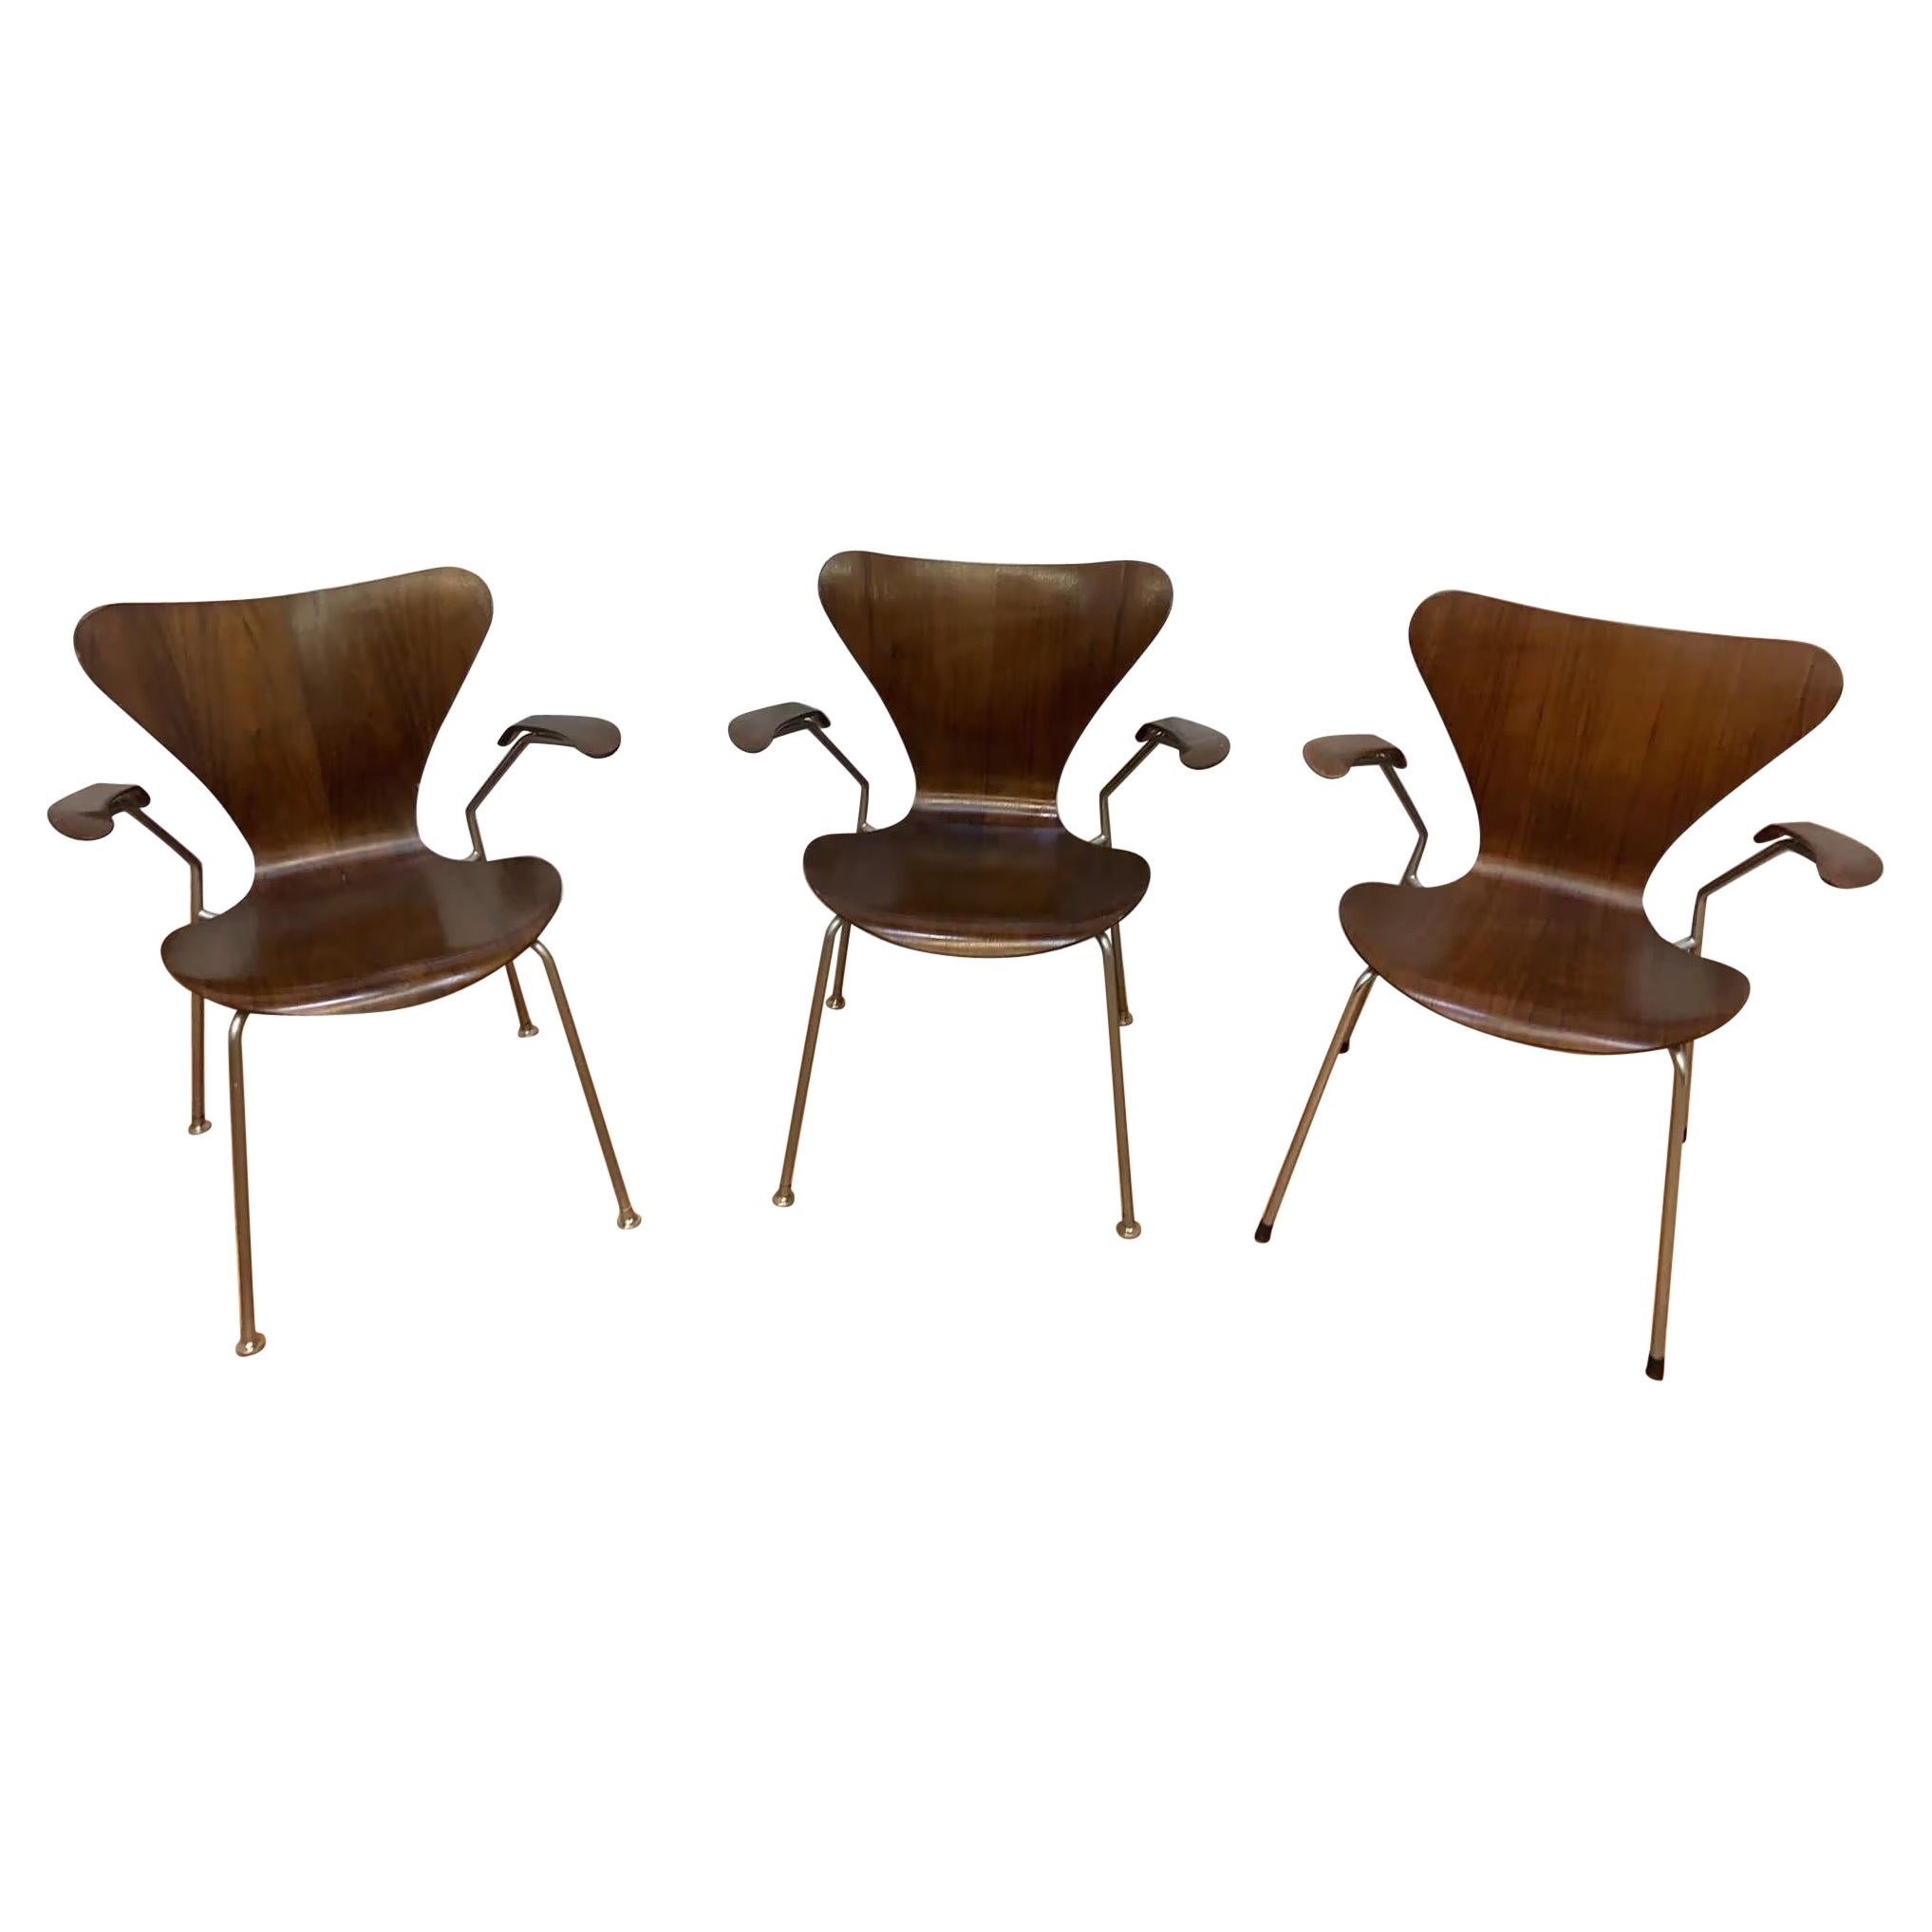 Series 7 Butterfly Teak Armchairs by Arne Jacobsen for Fritz Hansen - Set of 3 For Sale